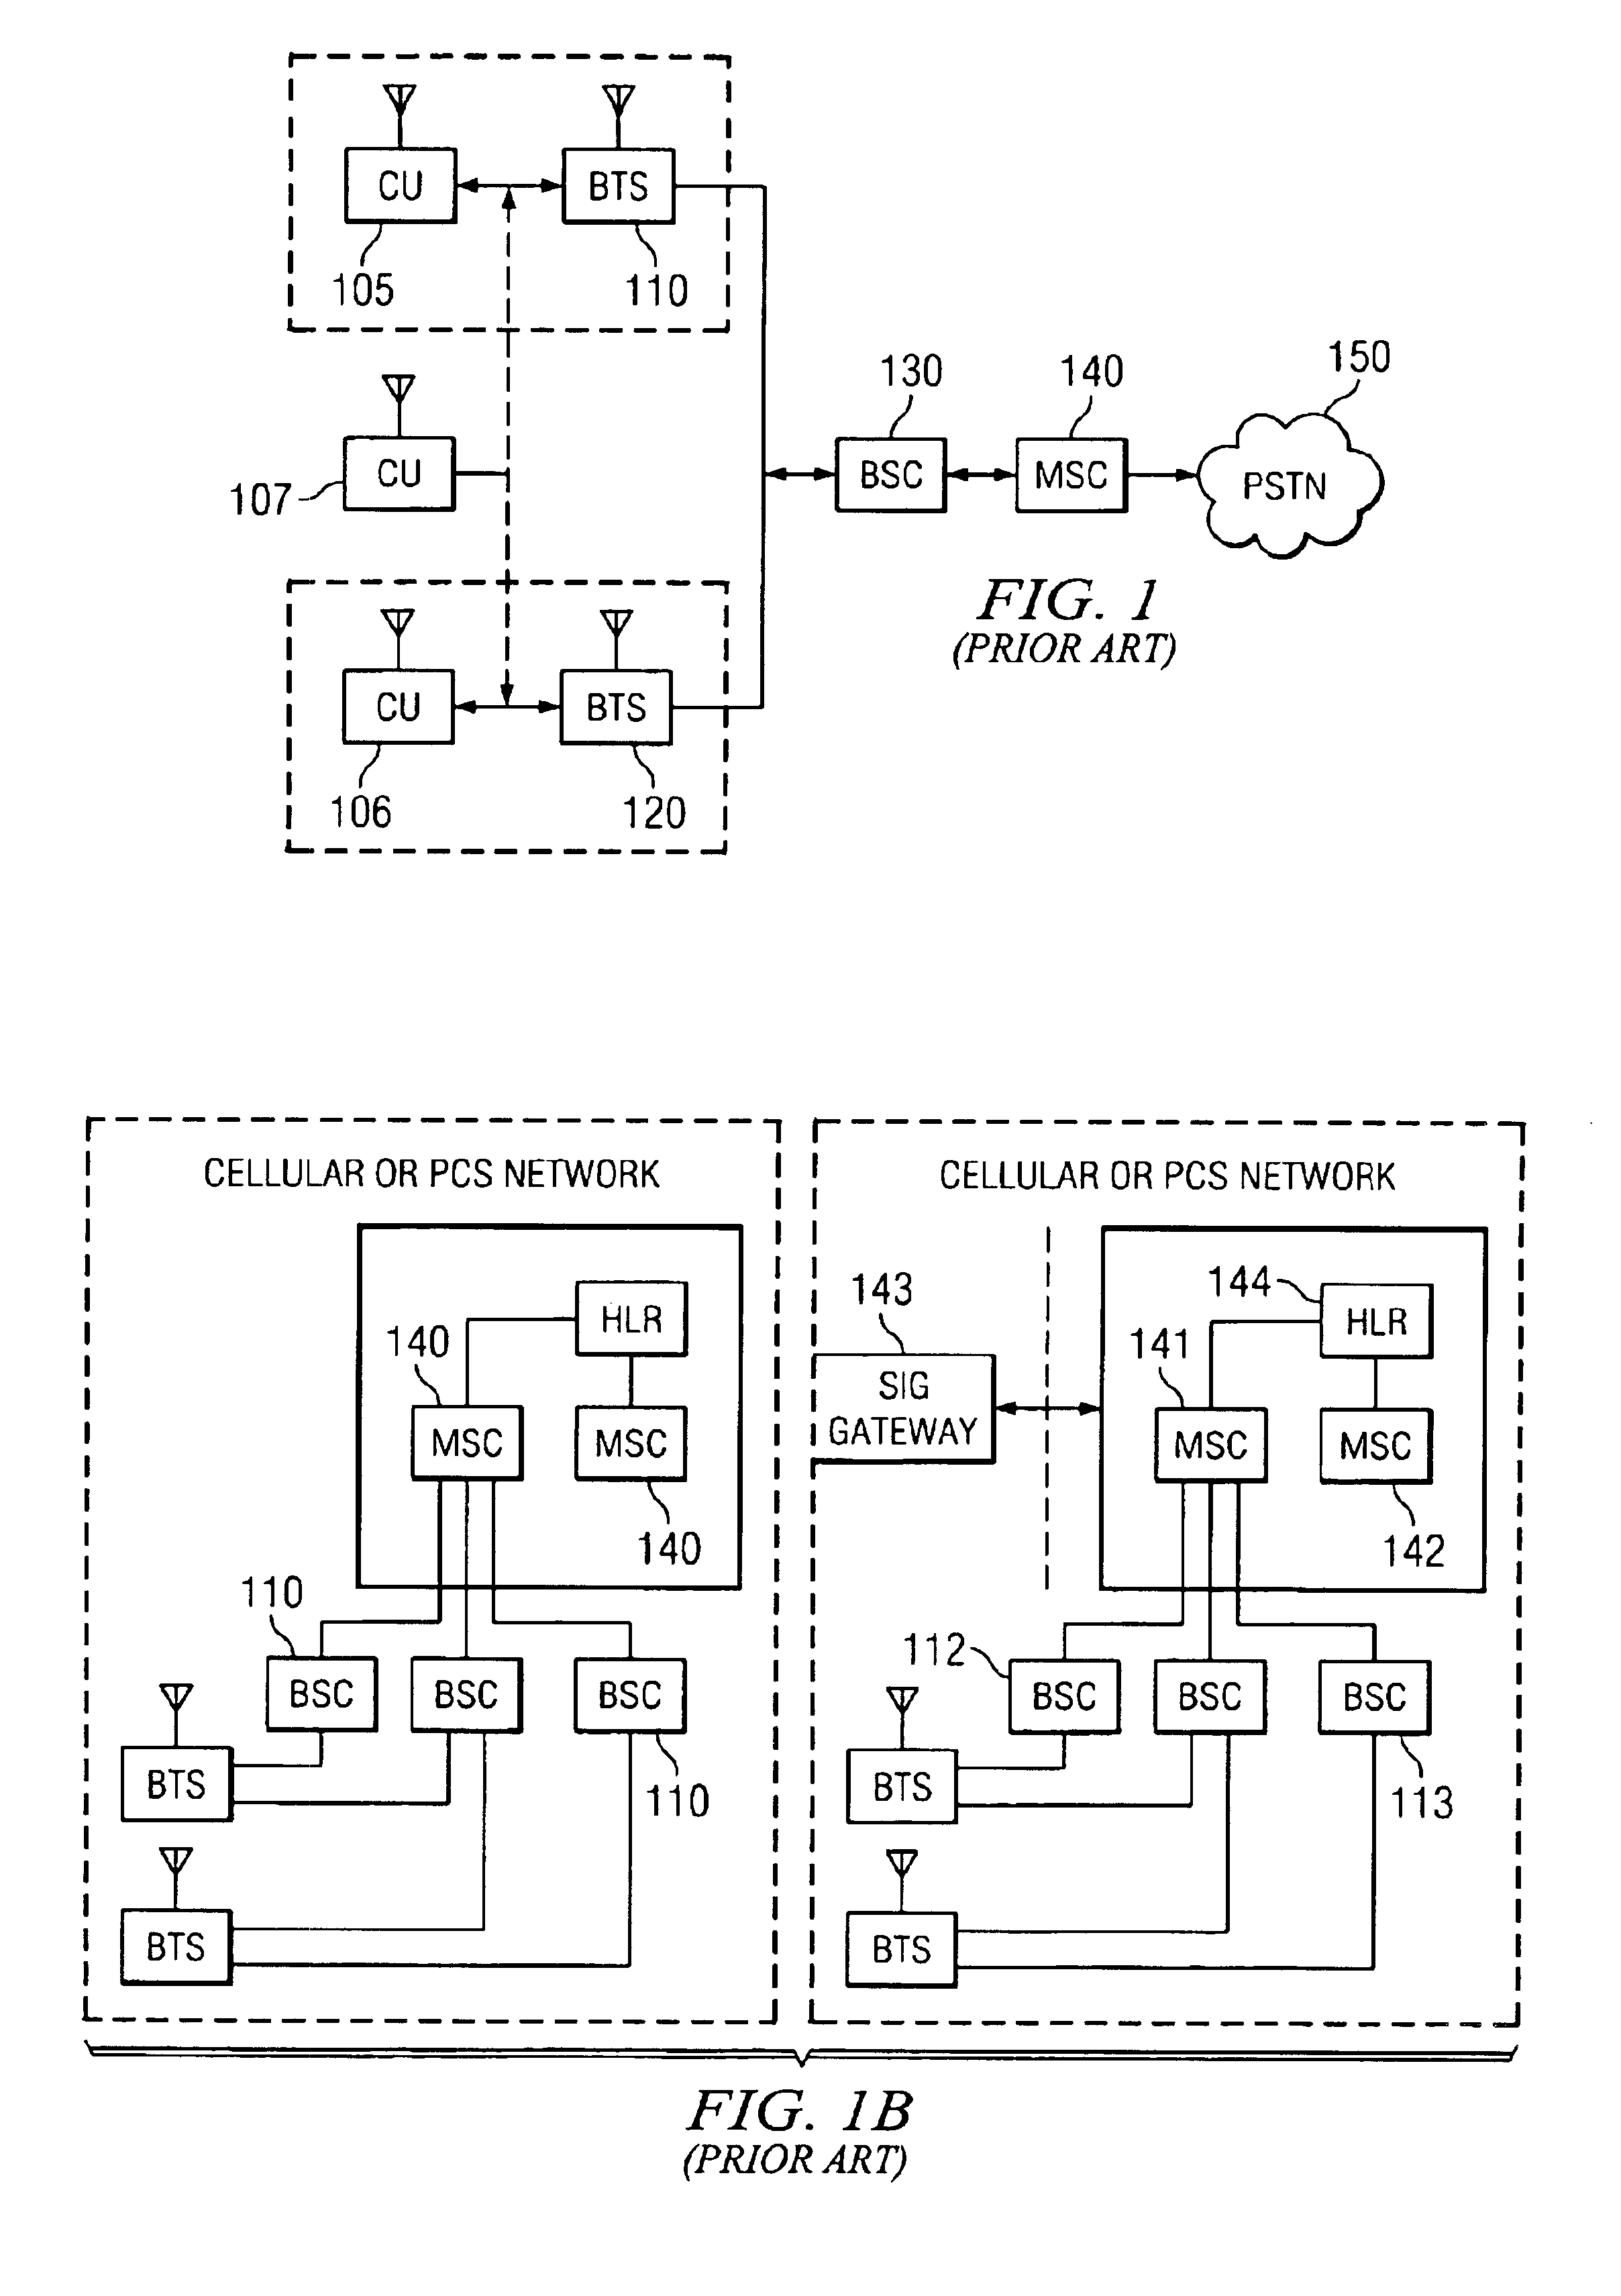 Handoff control in an enterprise division multiple access wireless system